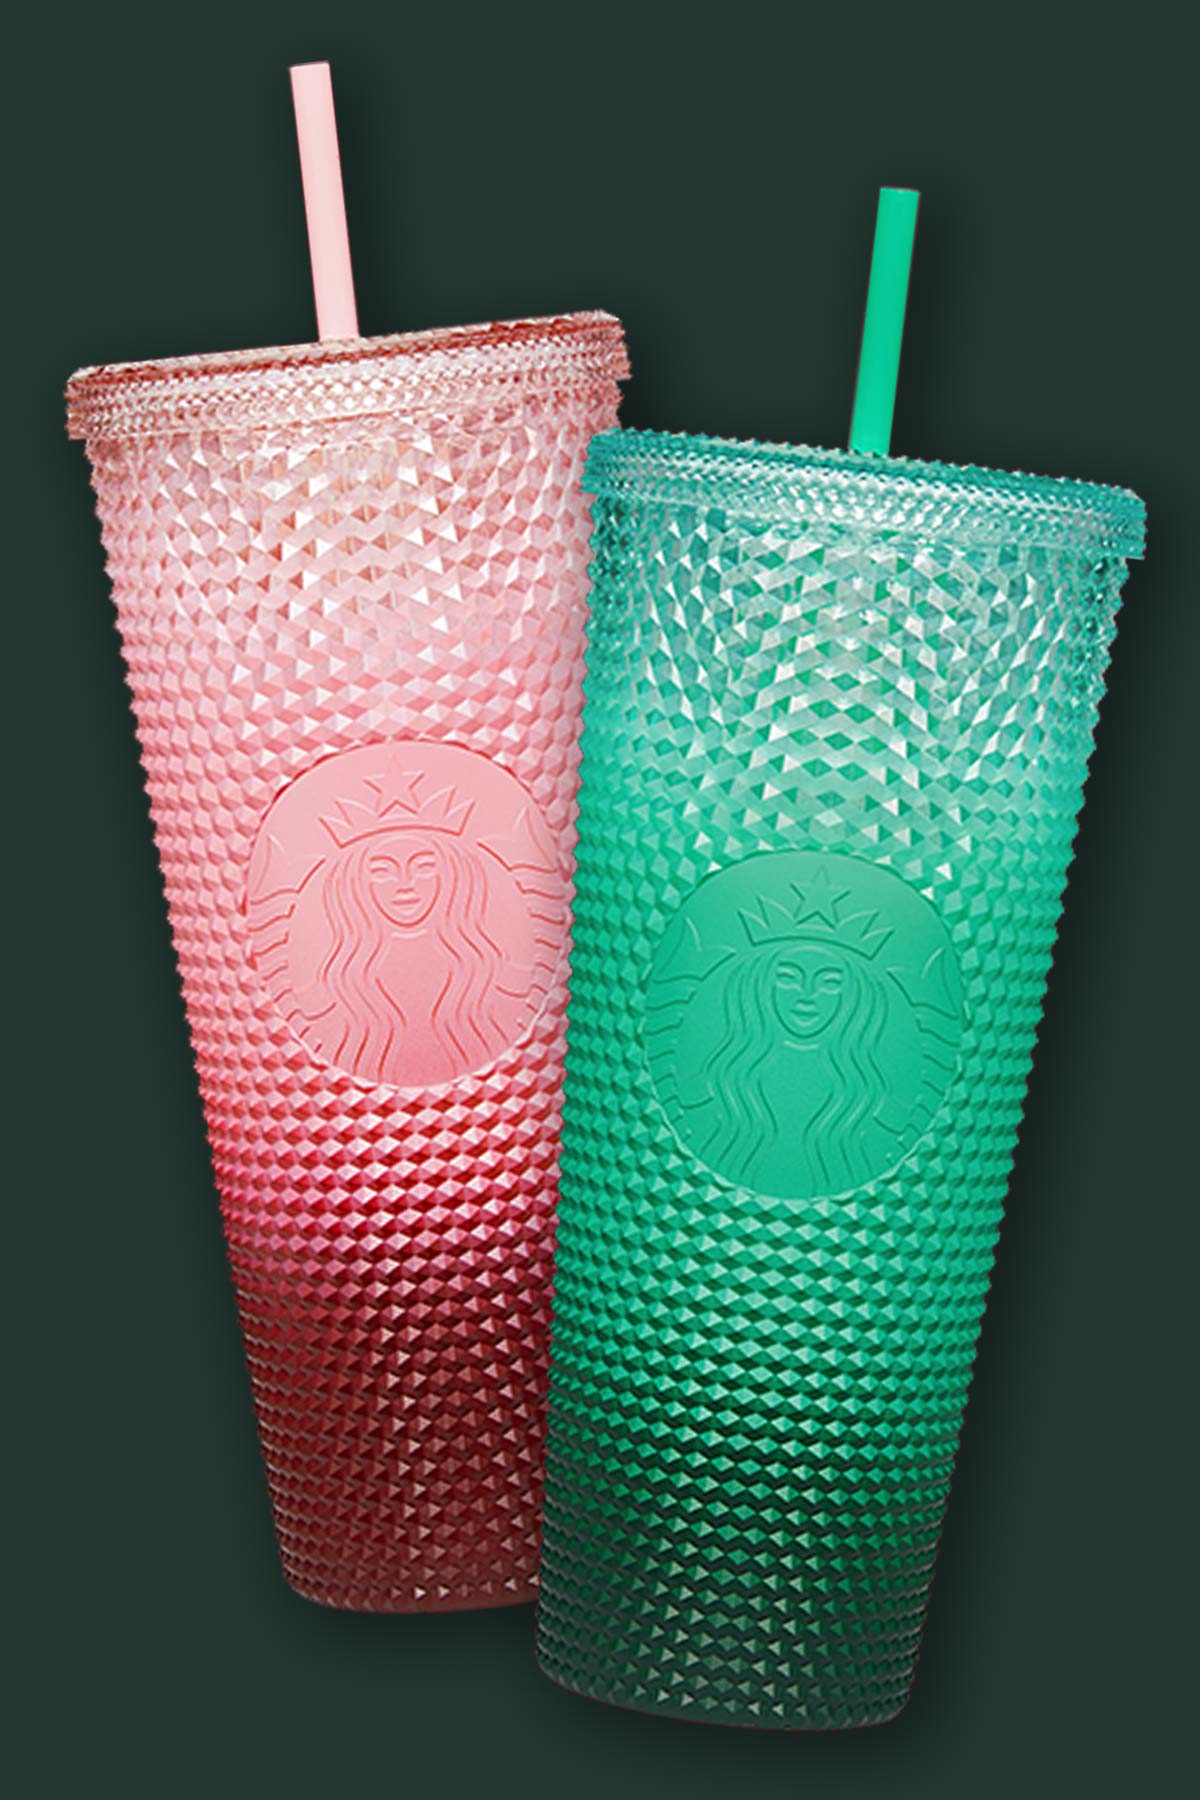 Starbucks reusable cups on a green background.